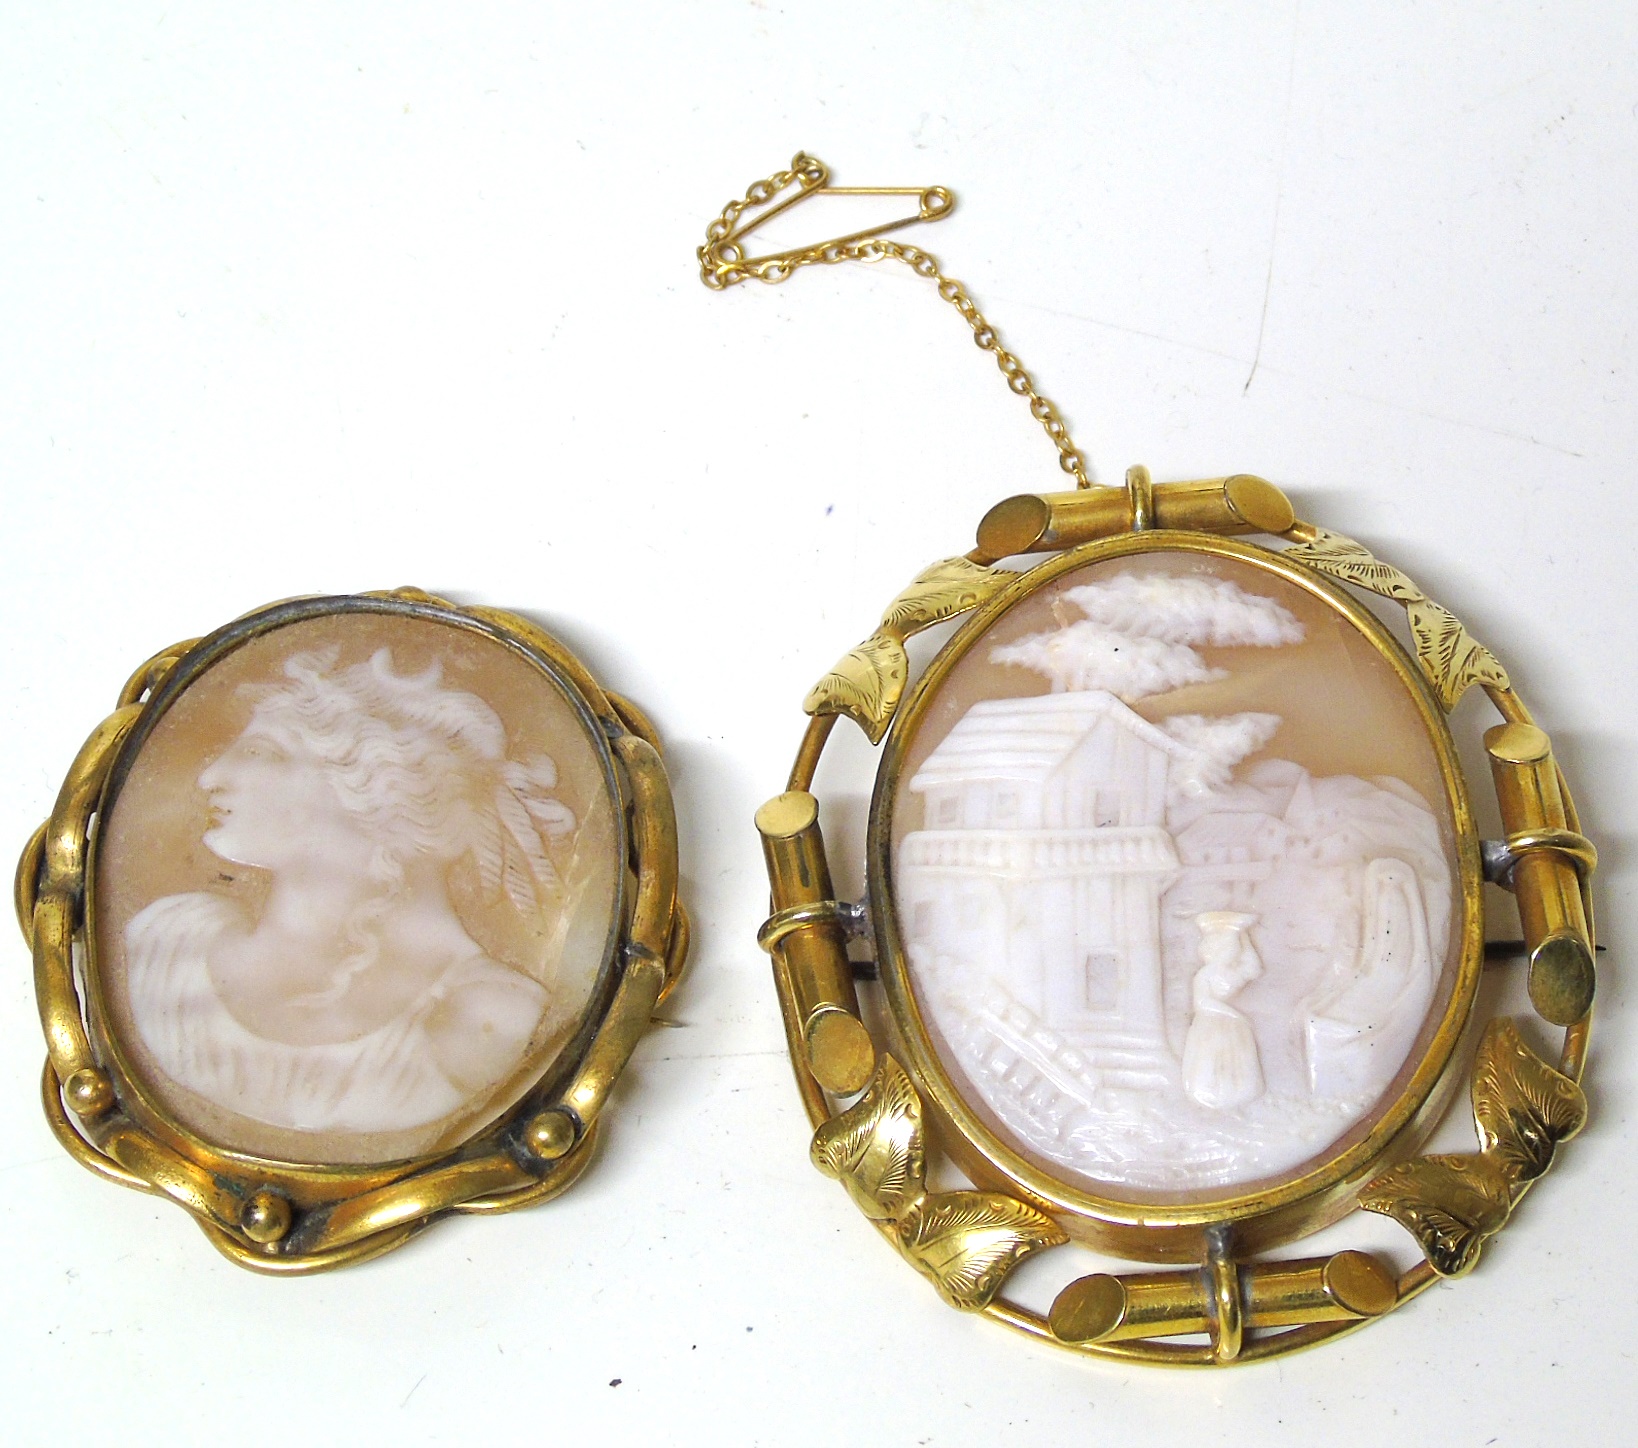 Two shell cameo brooches, one with a landscape scene the other depicting a classical figure,